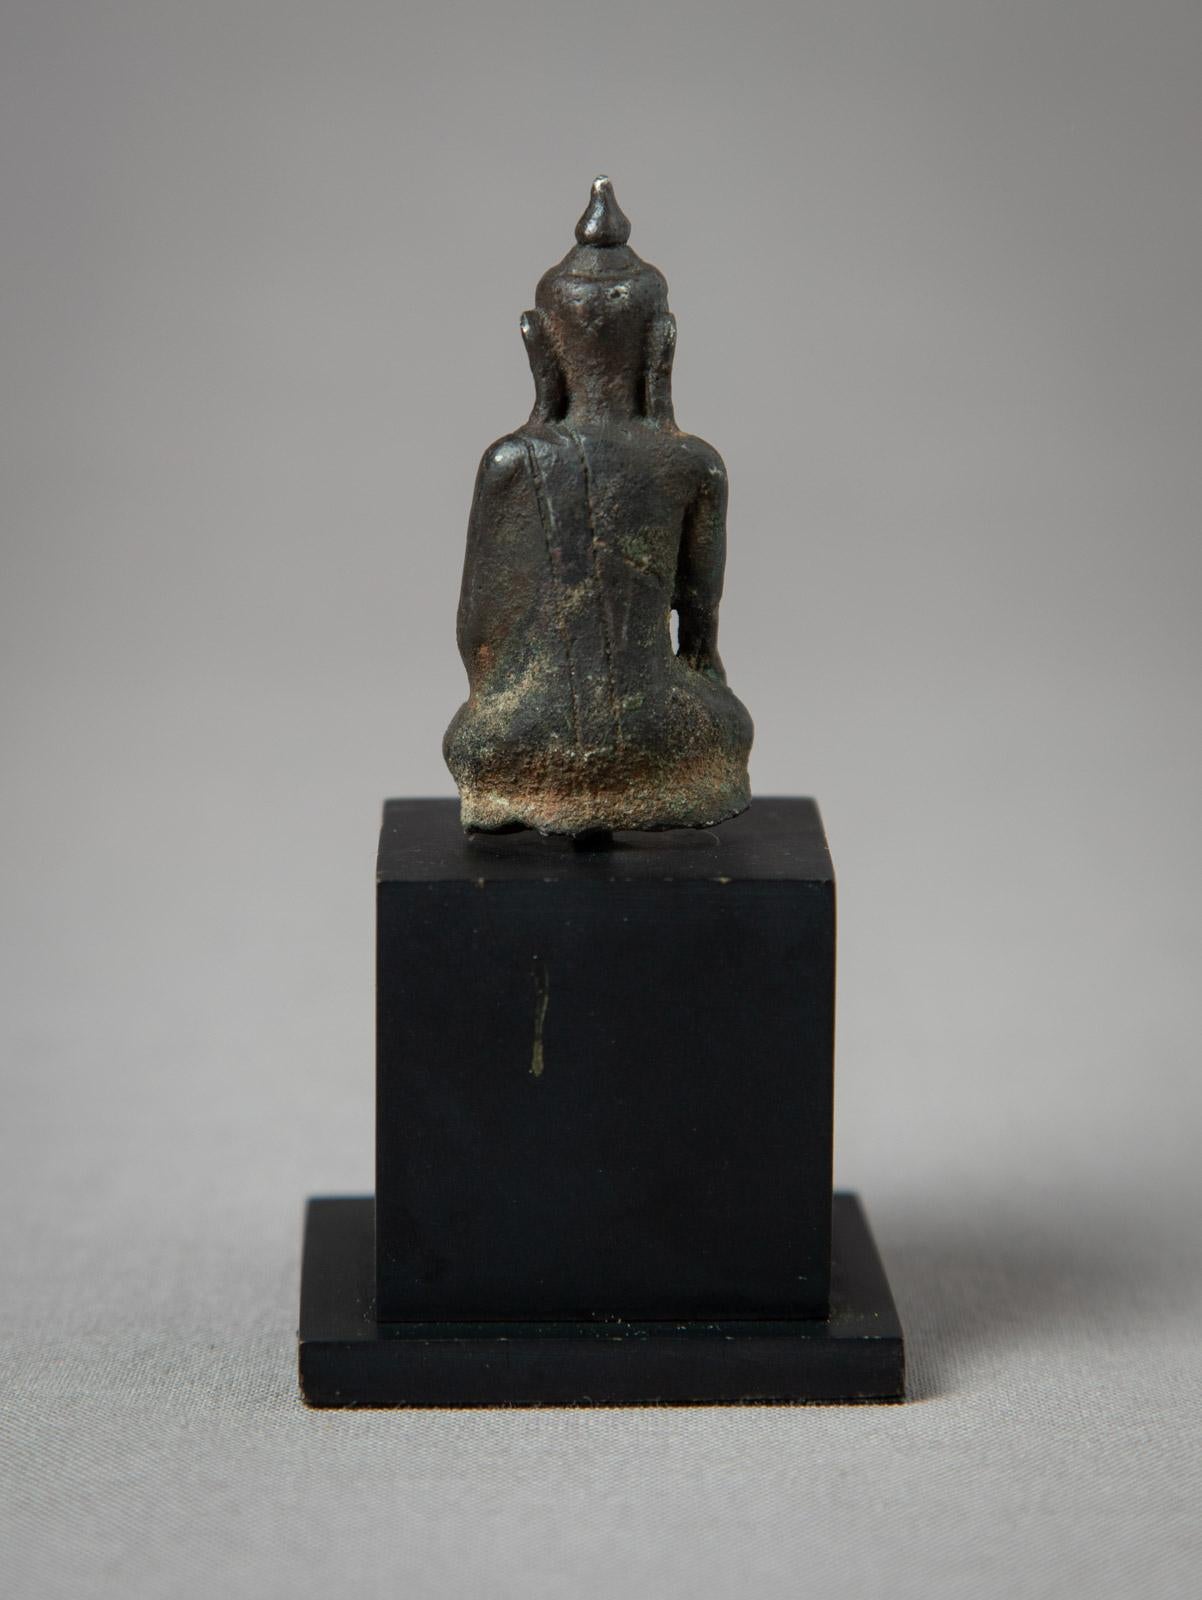 Antique bronze Burmese Buddha statue
Material : bronze
9,1 cm high
4,6 cm wide and 4,6 cm deep
The sizes are measured including the base
Ava style
Bhumisparsha mudra
16-17th century
Weight: 70 grams
Originating from Burma
Nr: 3827-16